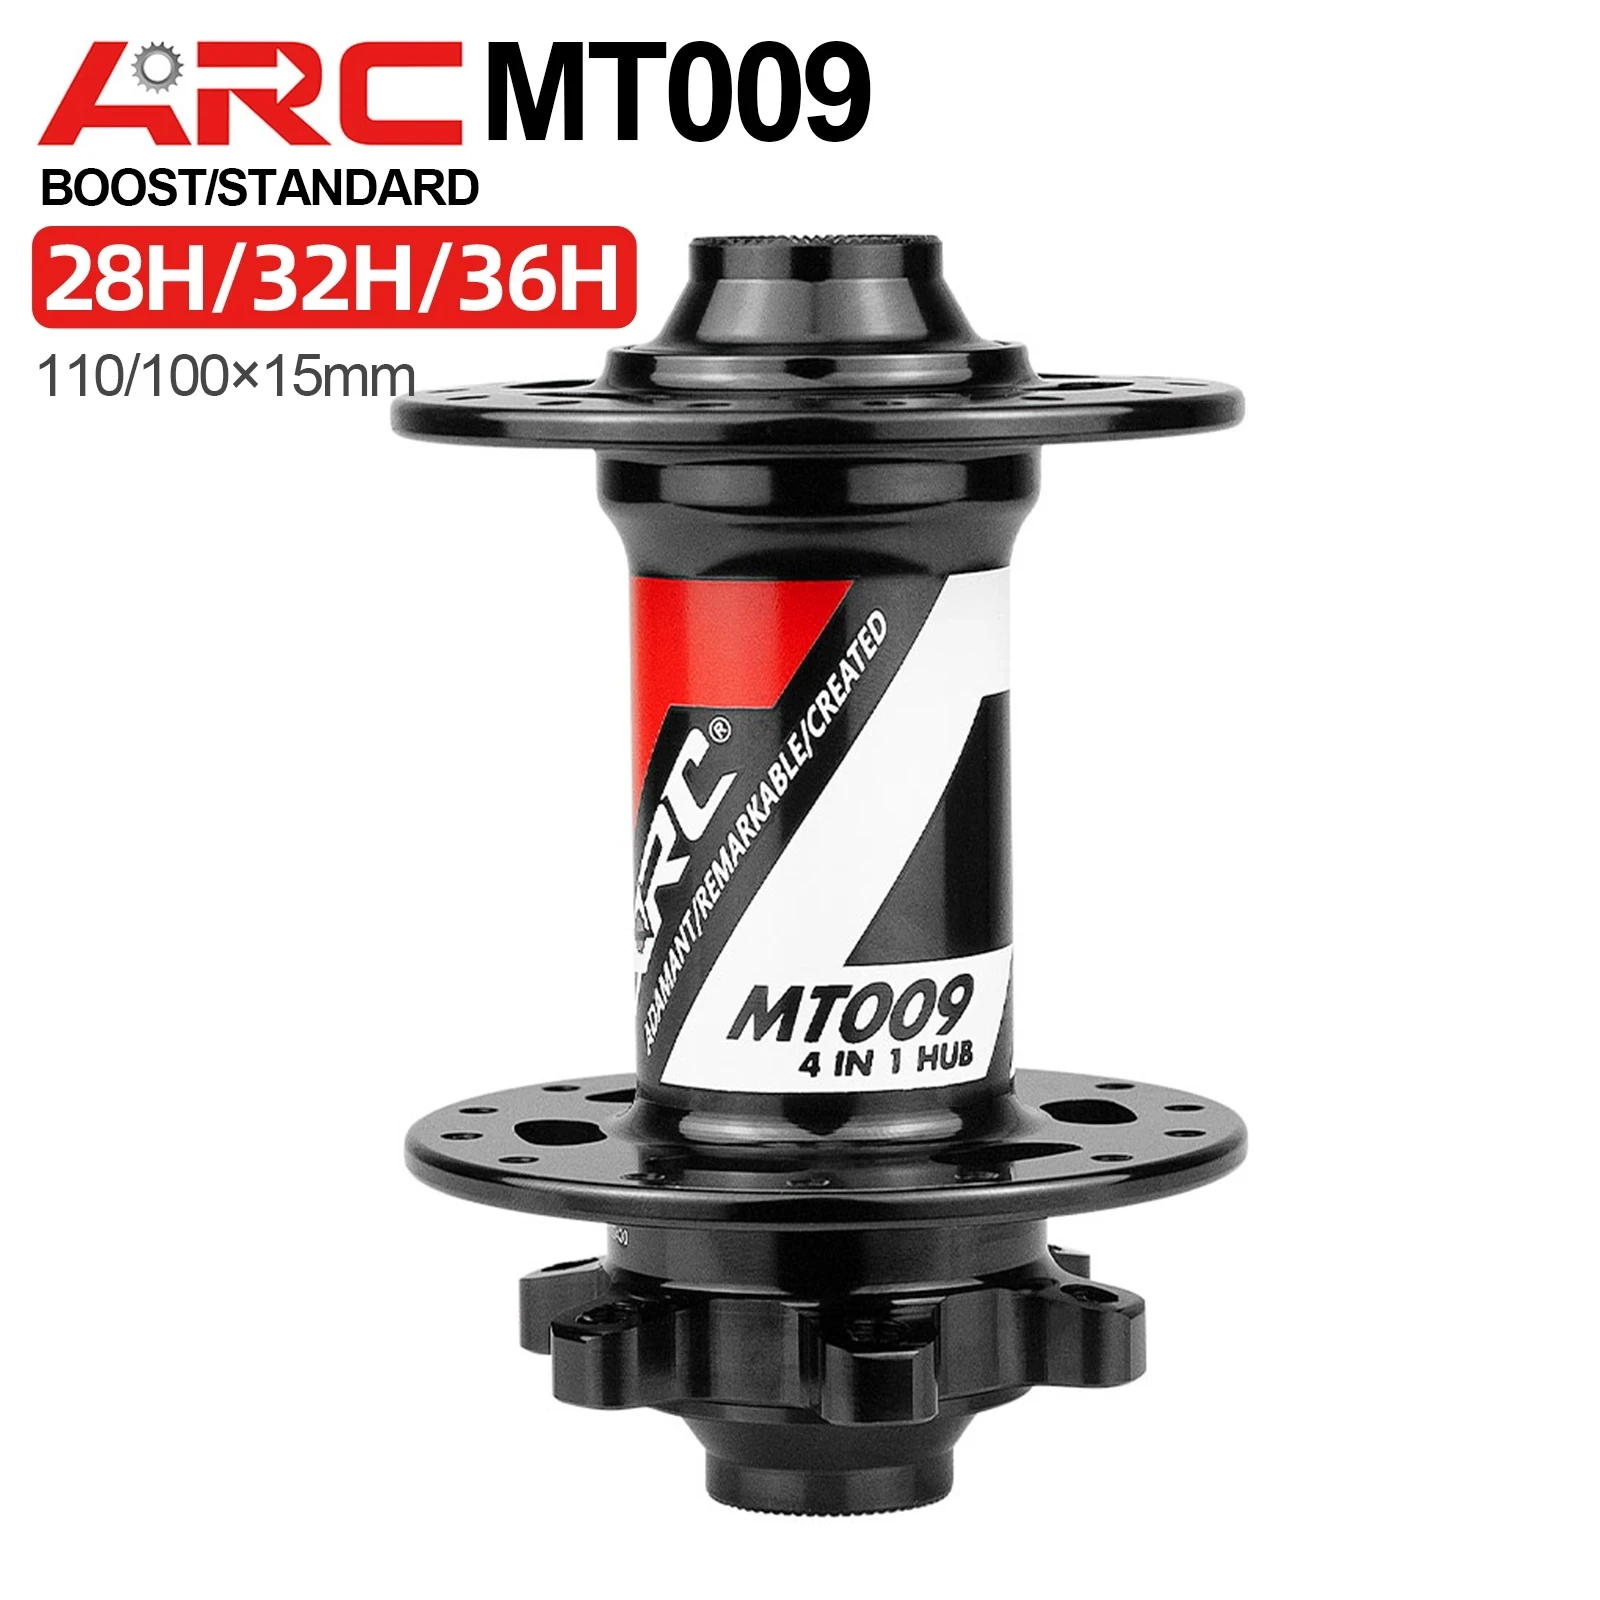 ARC MT009 4 IN 1 QR Boost Front Hub,28/32/36 Holes,100*9 100*15 110*15mm MTB Bike Mountain Biycle Front Hubs,Cycling Parts